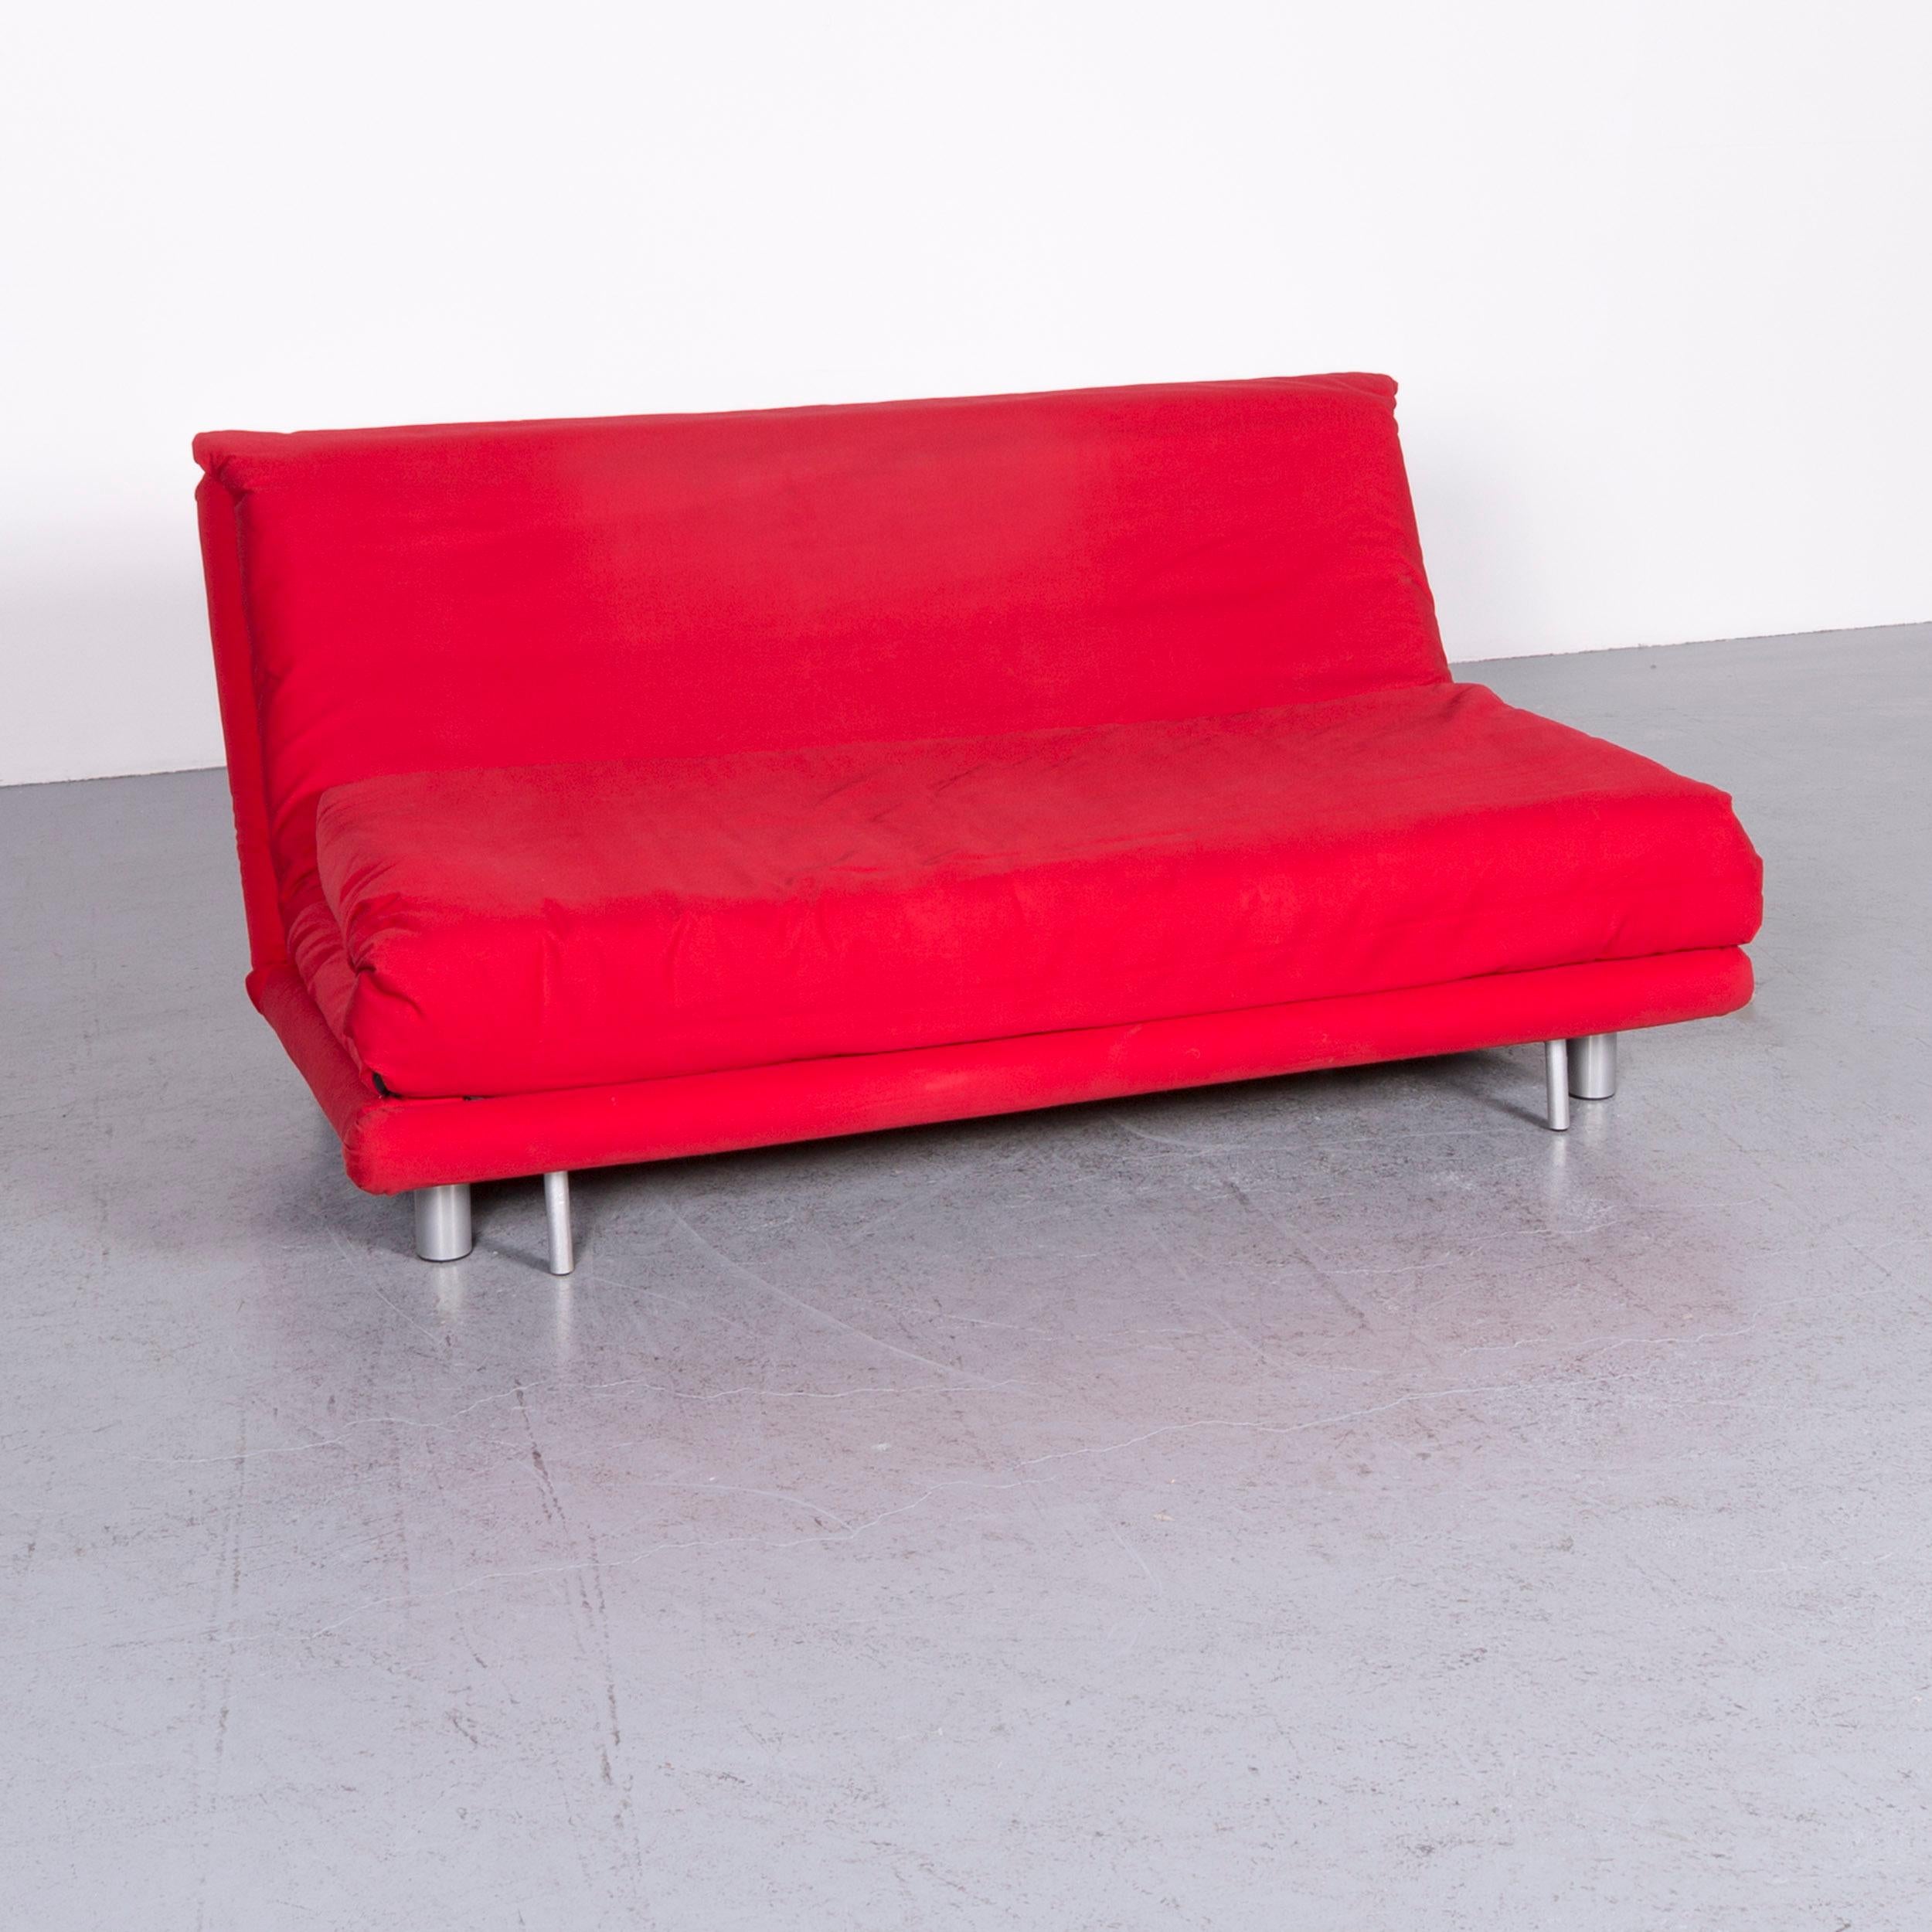 We bring to you an Ligne Roset Multy fabric sofa-bed red two-seat couch sleep function.




























